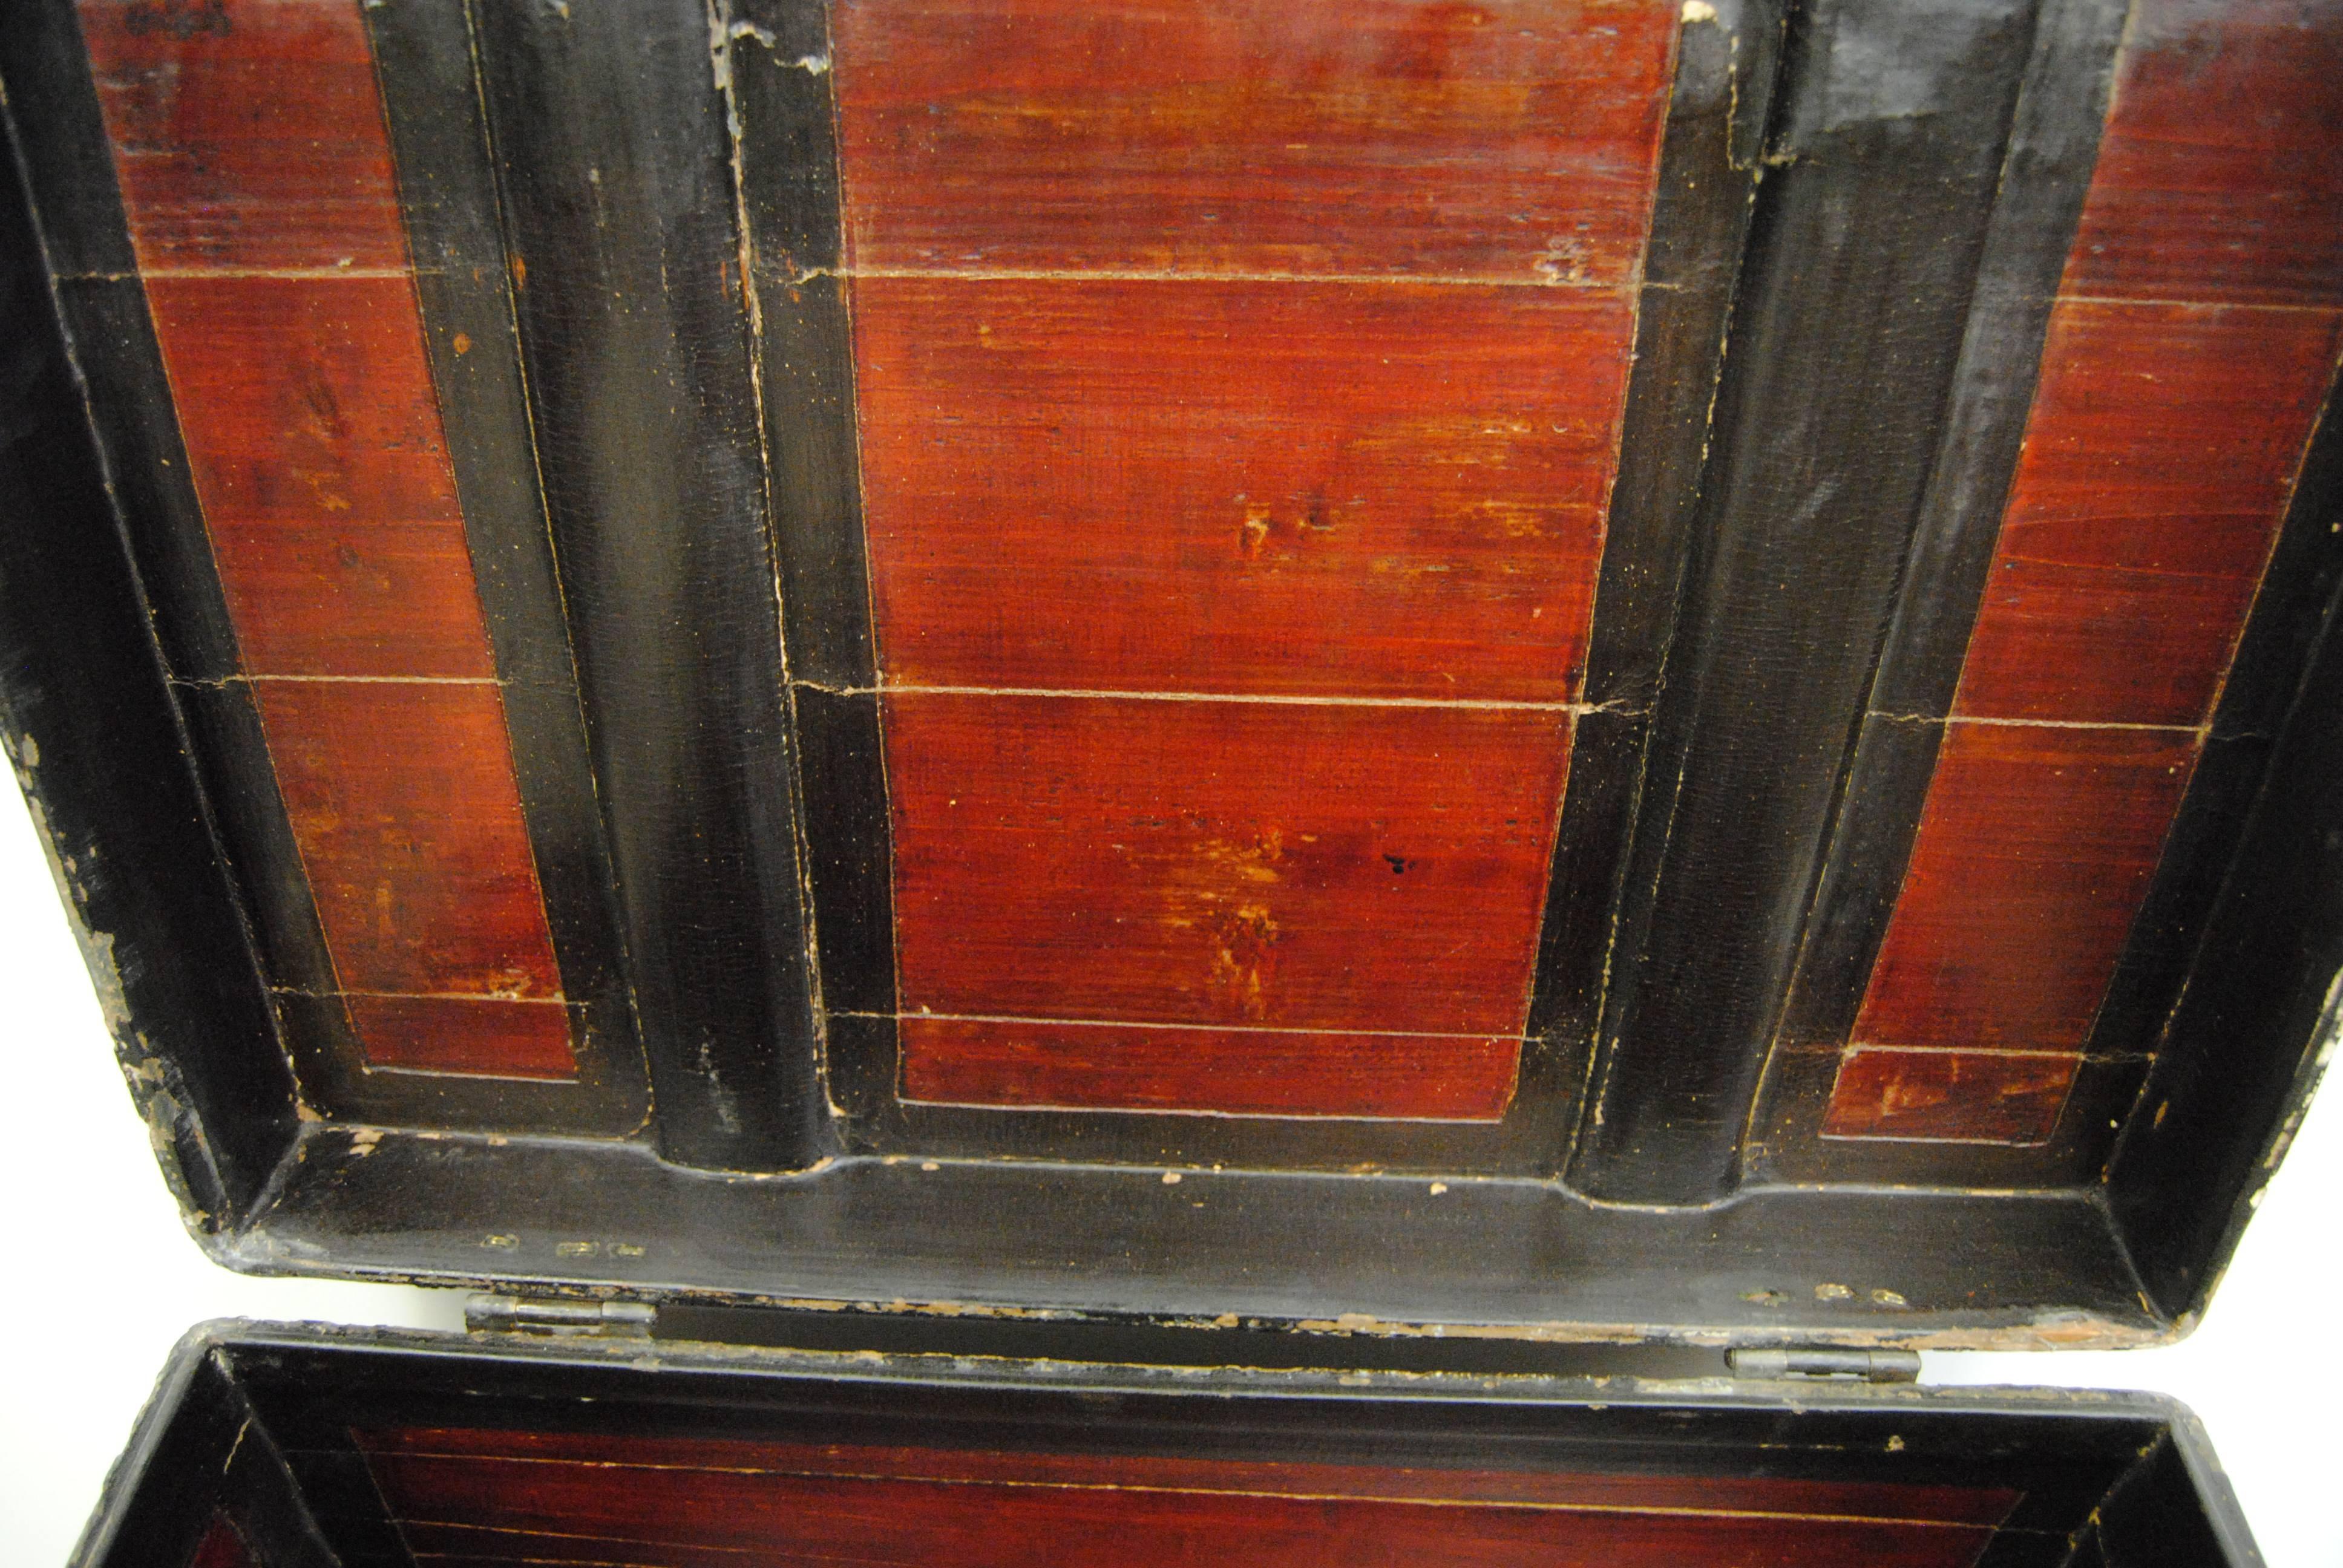 Antique Chinese trunk, circa late 19th century. Woven willow side panels with hand-carved lower wood trim with original red and black lacquer. Hand-forged iron hardware. Top is well worn. Wooden interior color is strong and in good condition. An